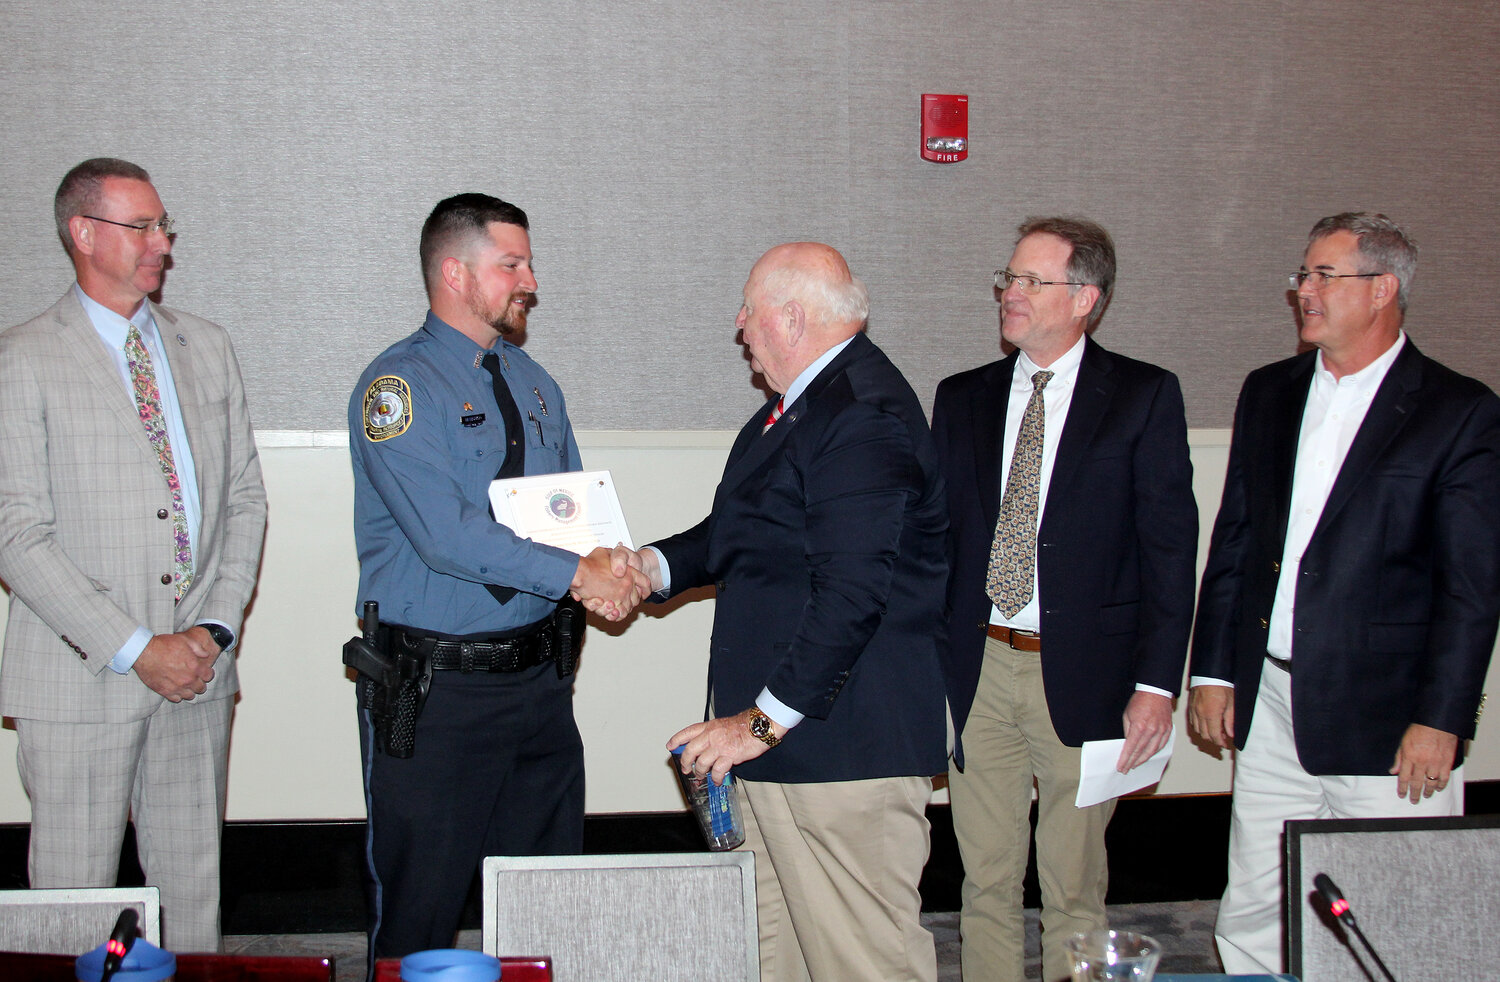 Alabama Marine Resources Officer Chance Mancuso receives the Gulf of Mexico Fishery Management Council Officer of the Year Award from Joe Spraggins of the Gulf Council's law enforcement committee.